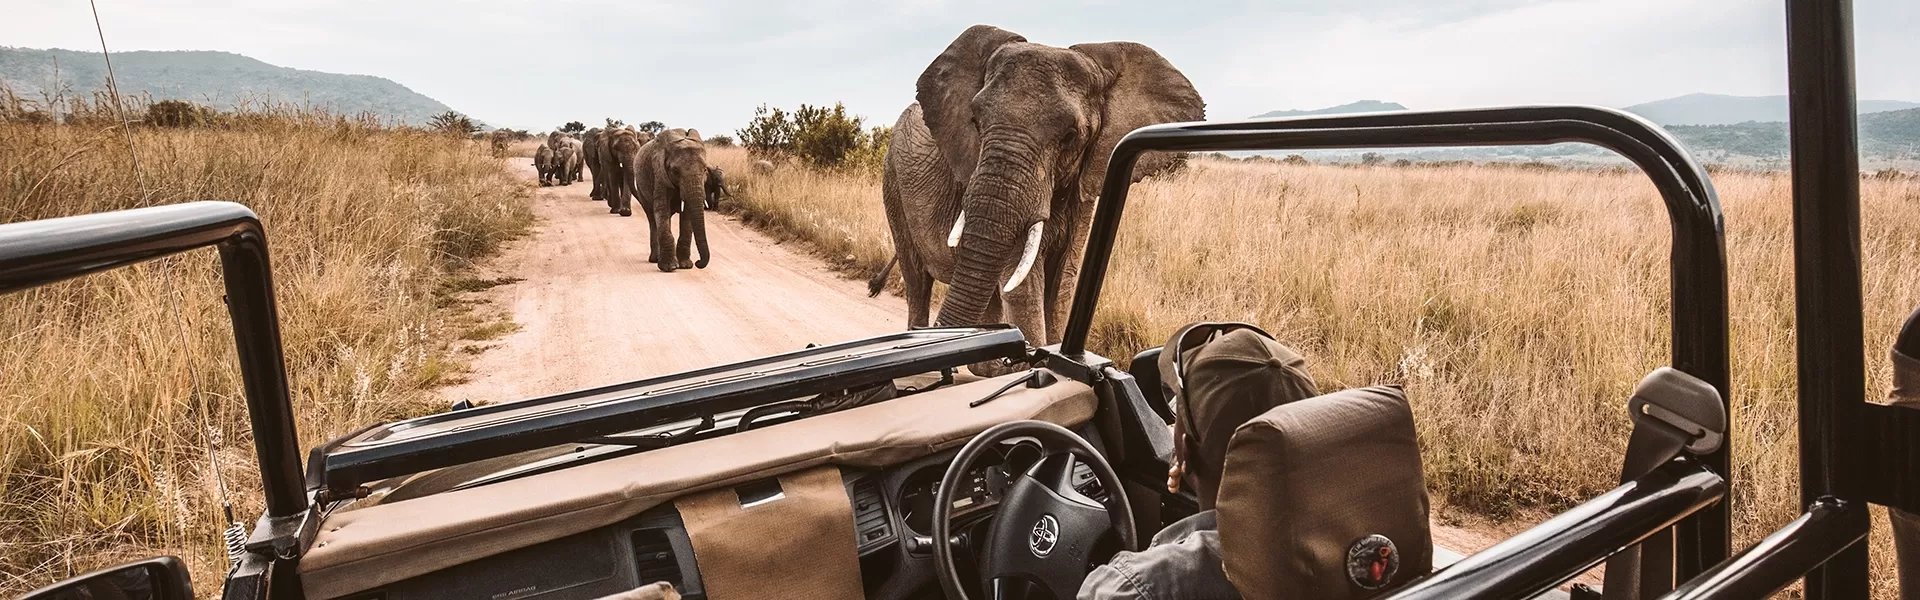 Vintage defender driving through a field full of elephants